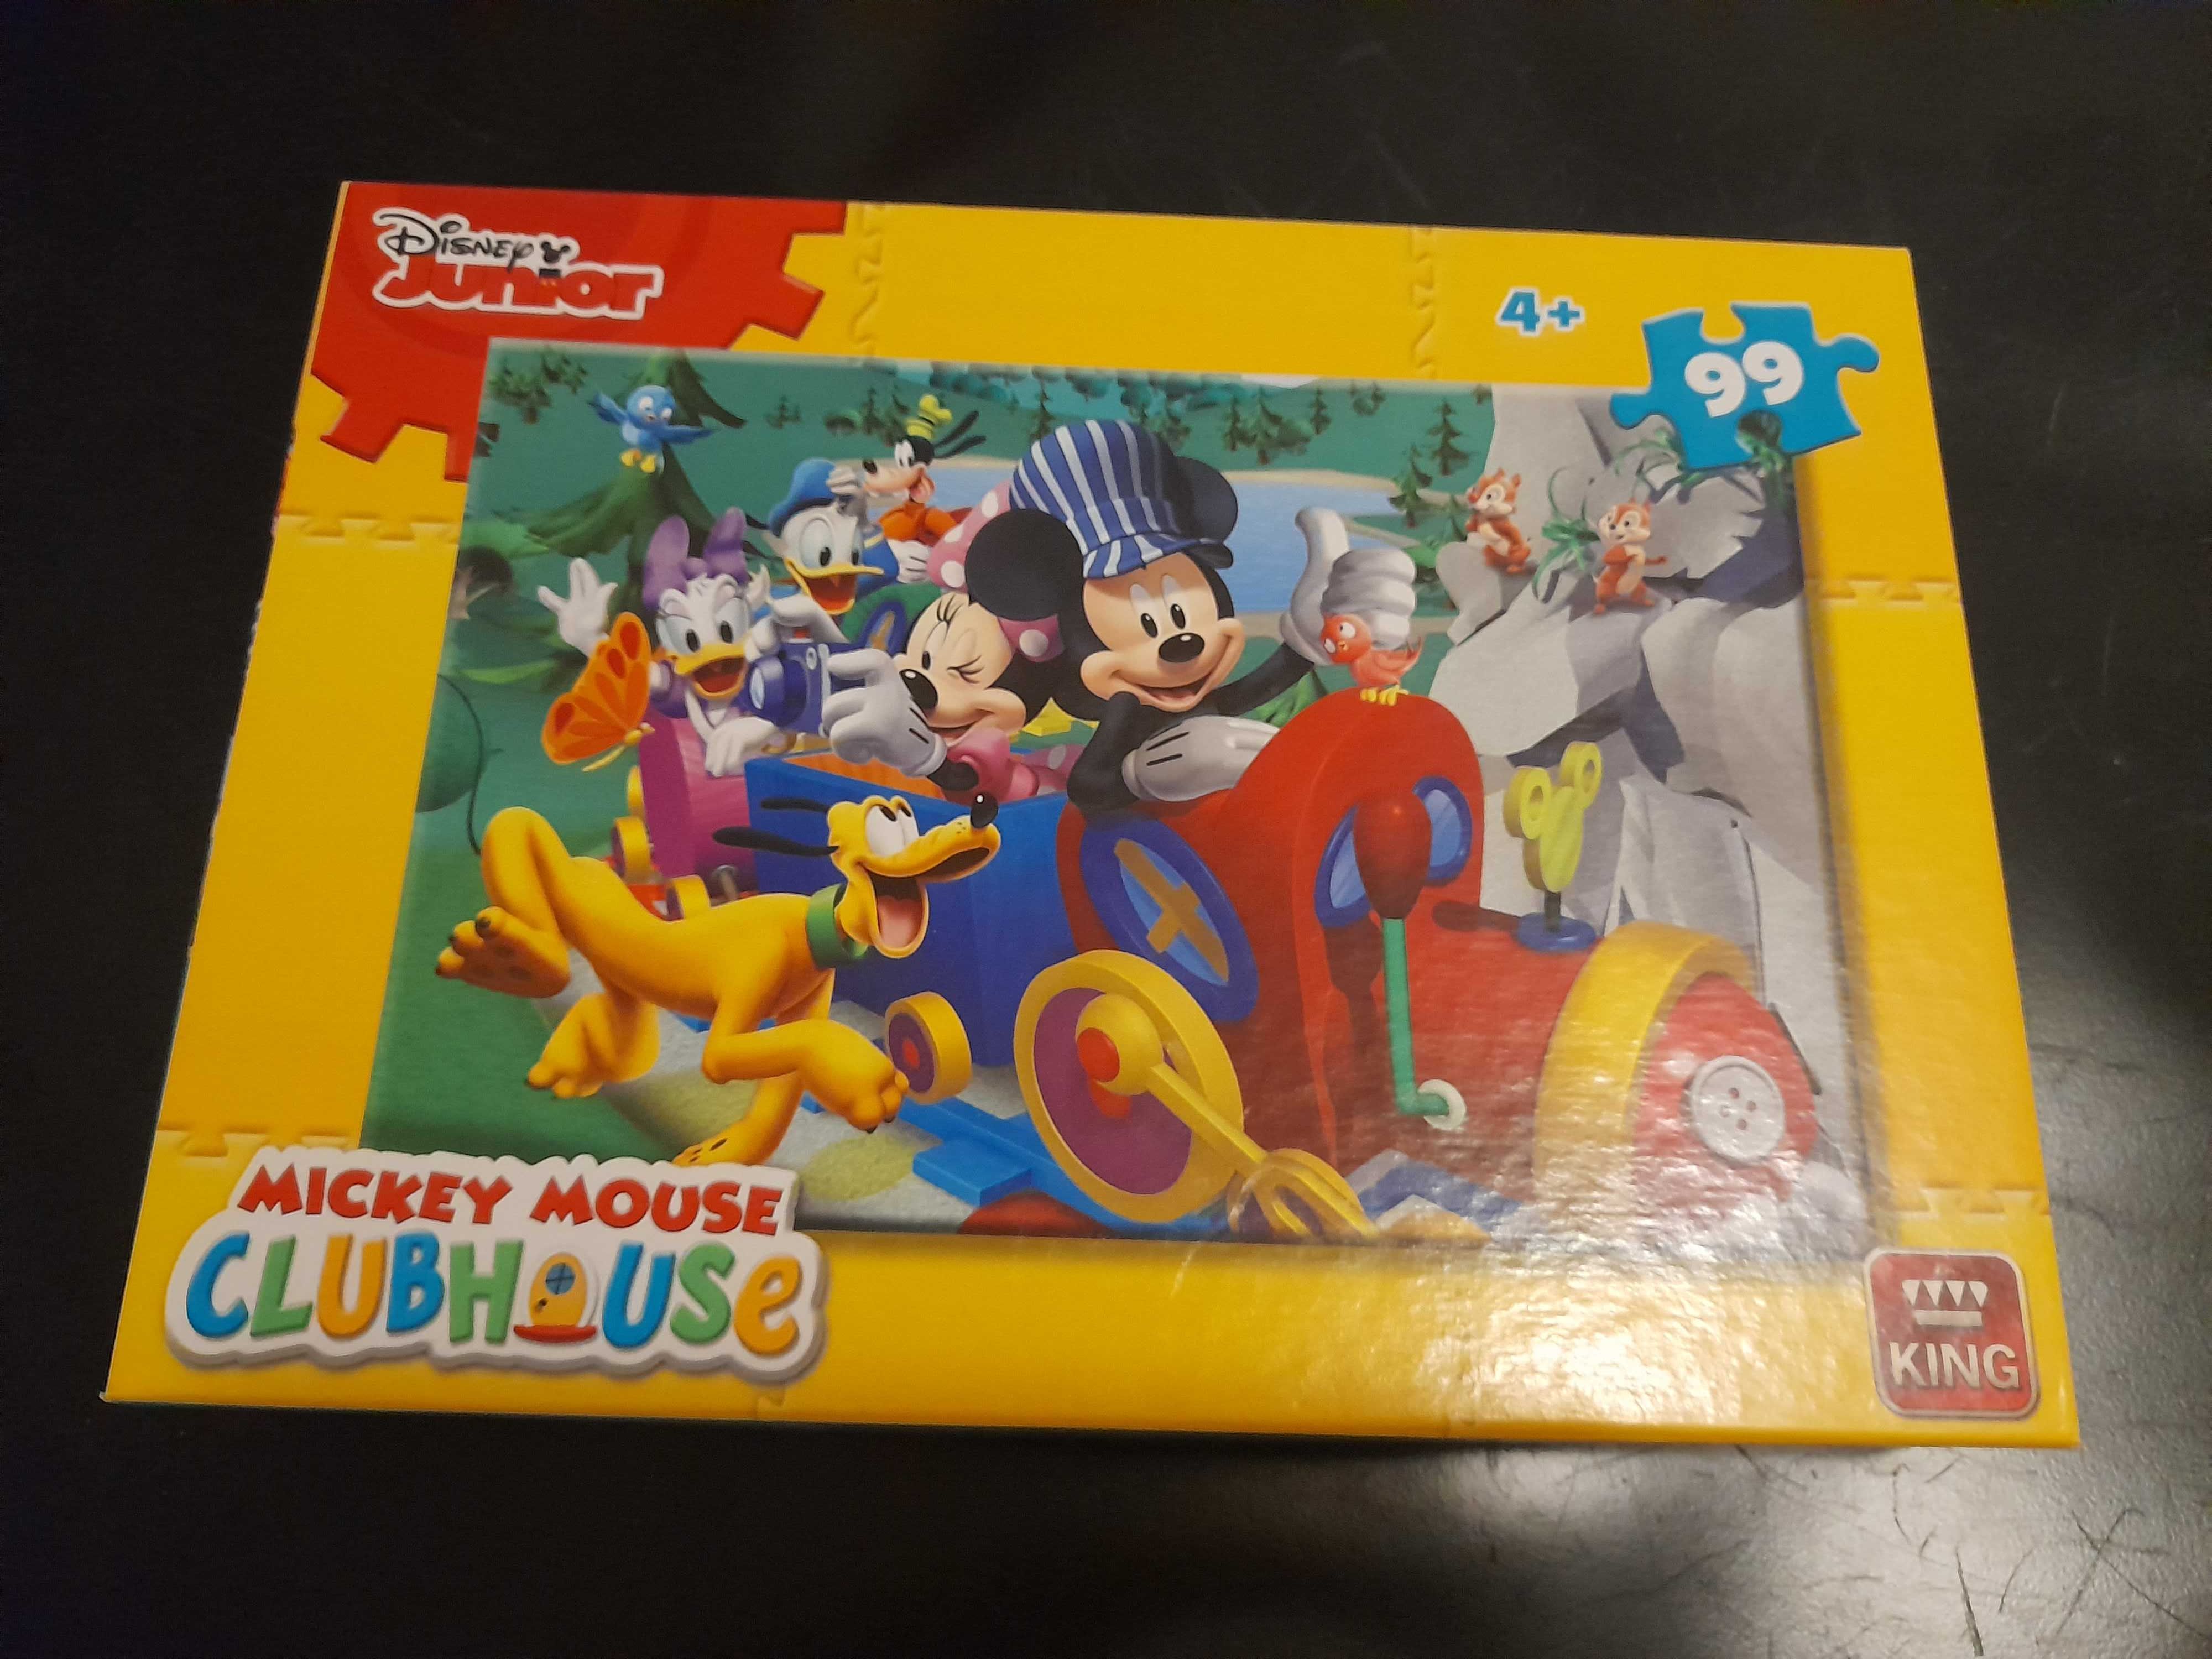 Puzzle "Mickey Mouse Clubhouse"